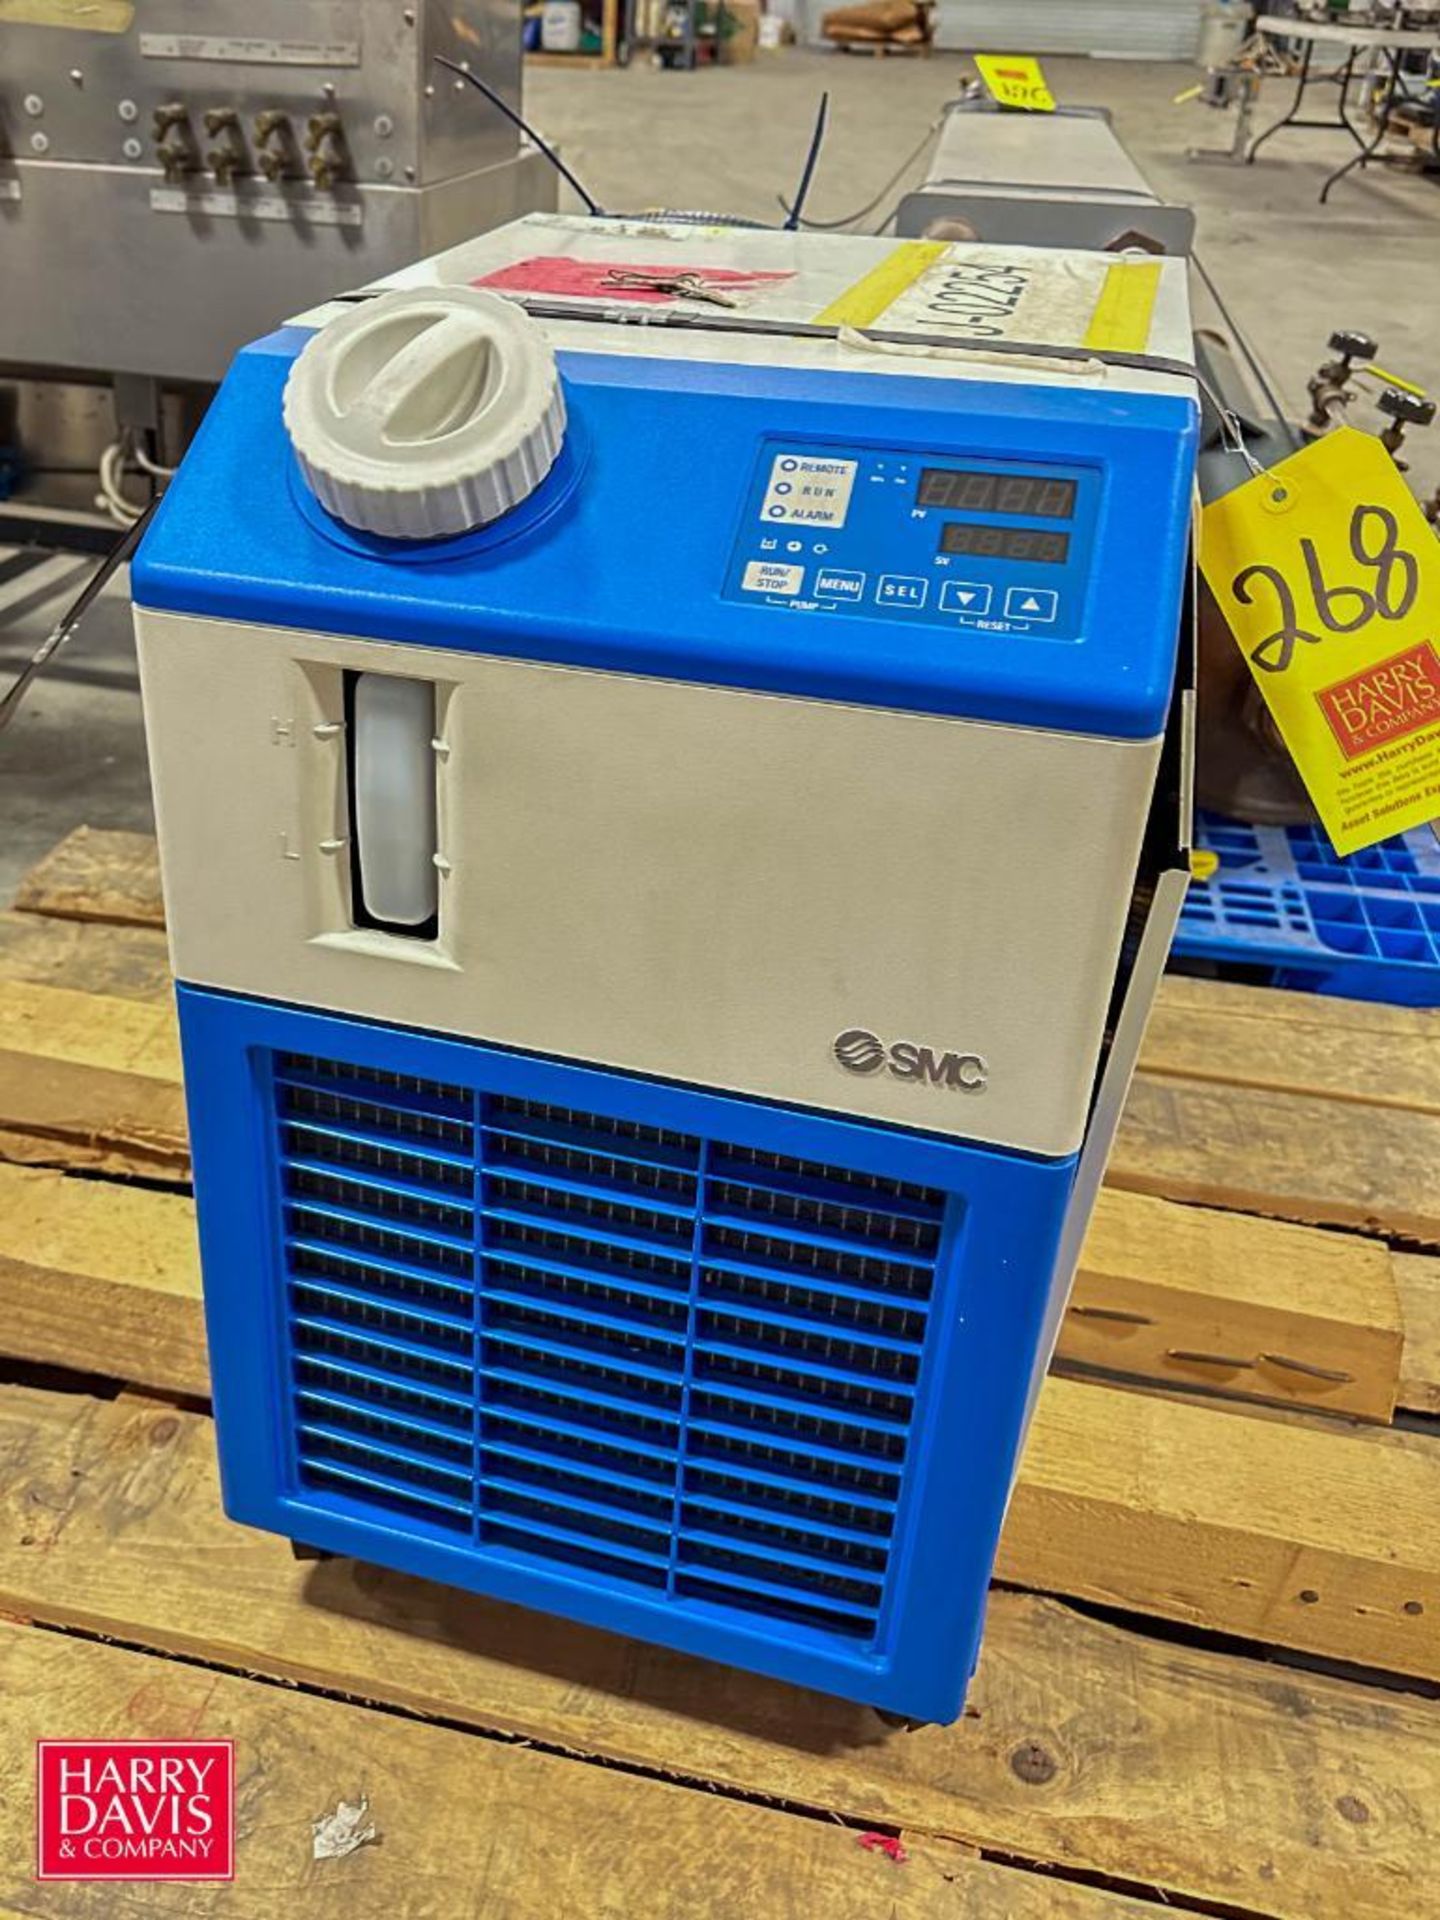 SMC Chiller, Model: HRS012-Air Filters-20, S/N: S0259 - Rigging Fee: $100